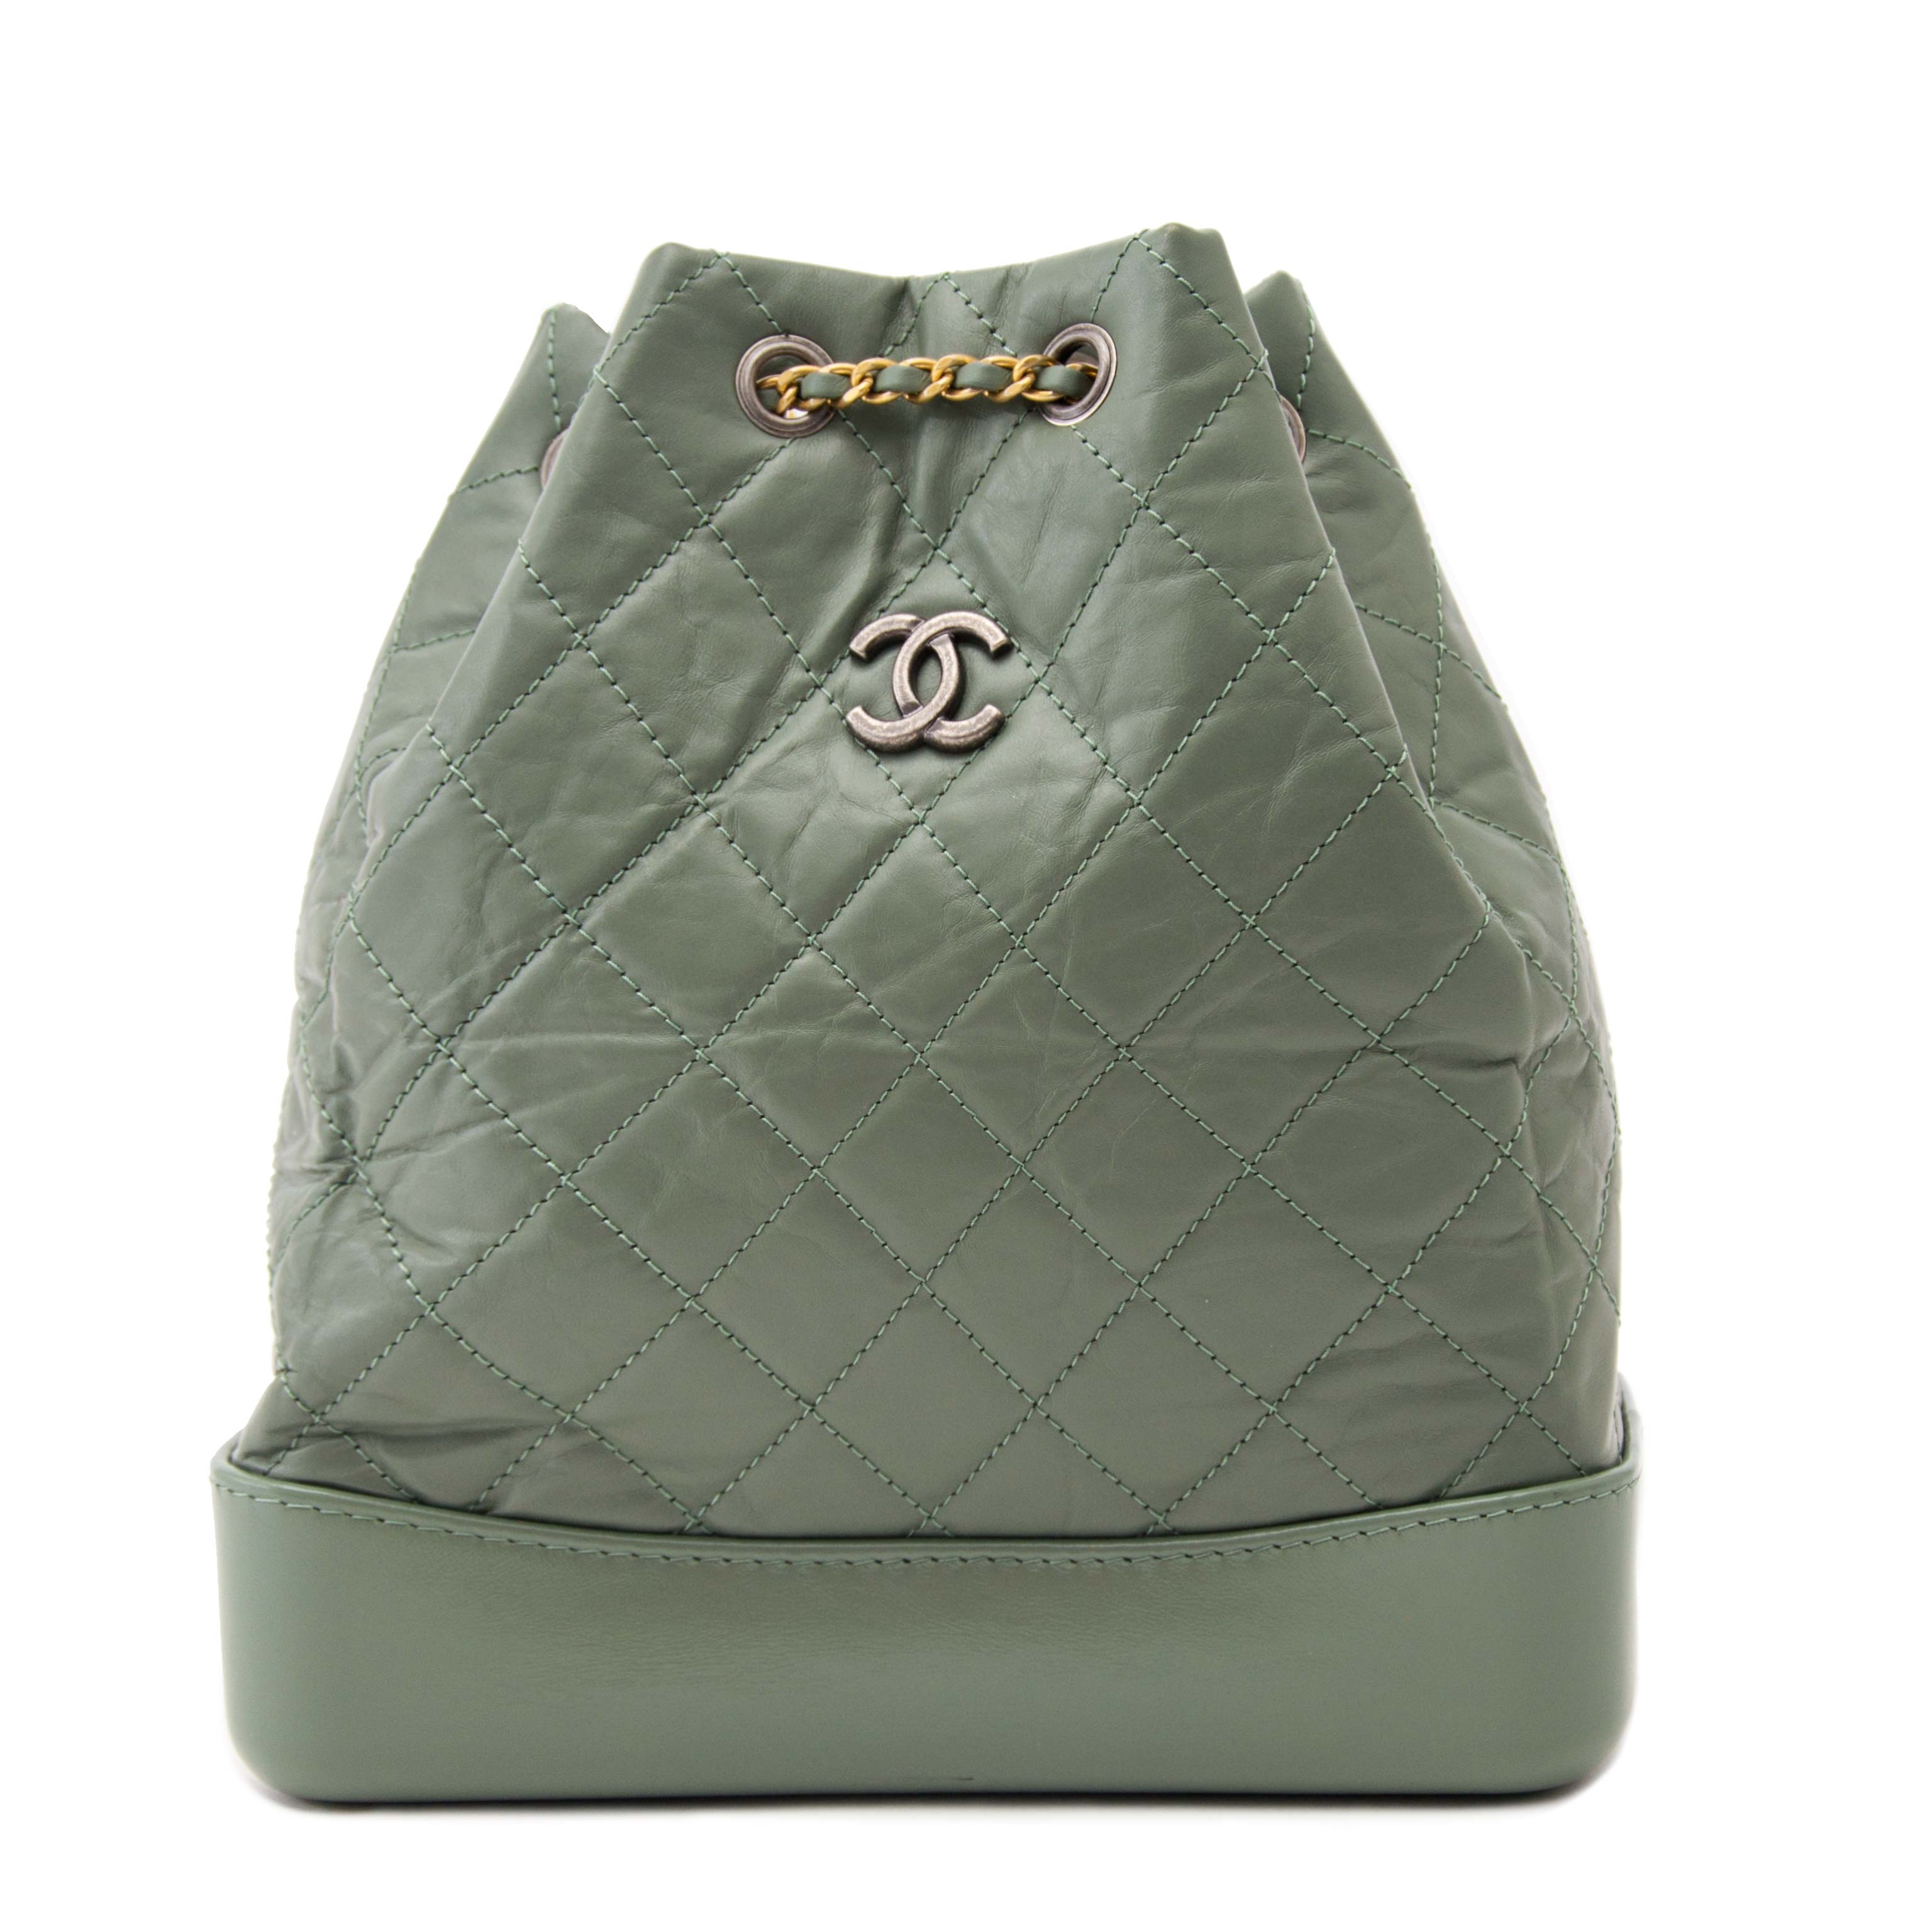 Chanel Small Green Gabrielle Backpack